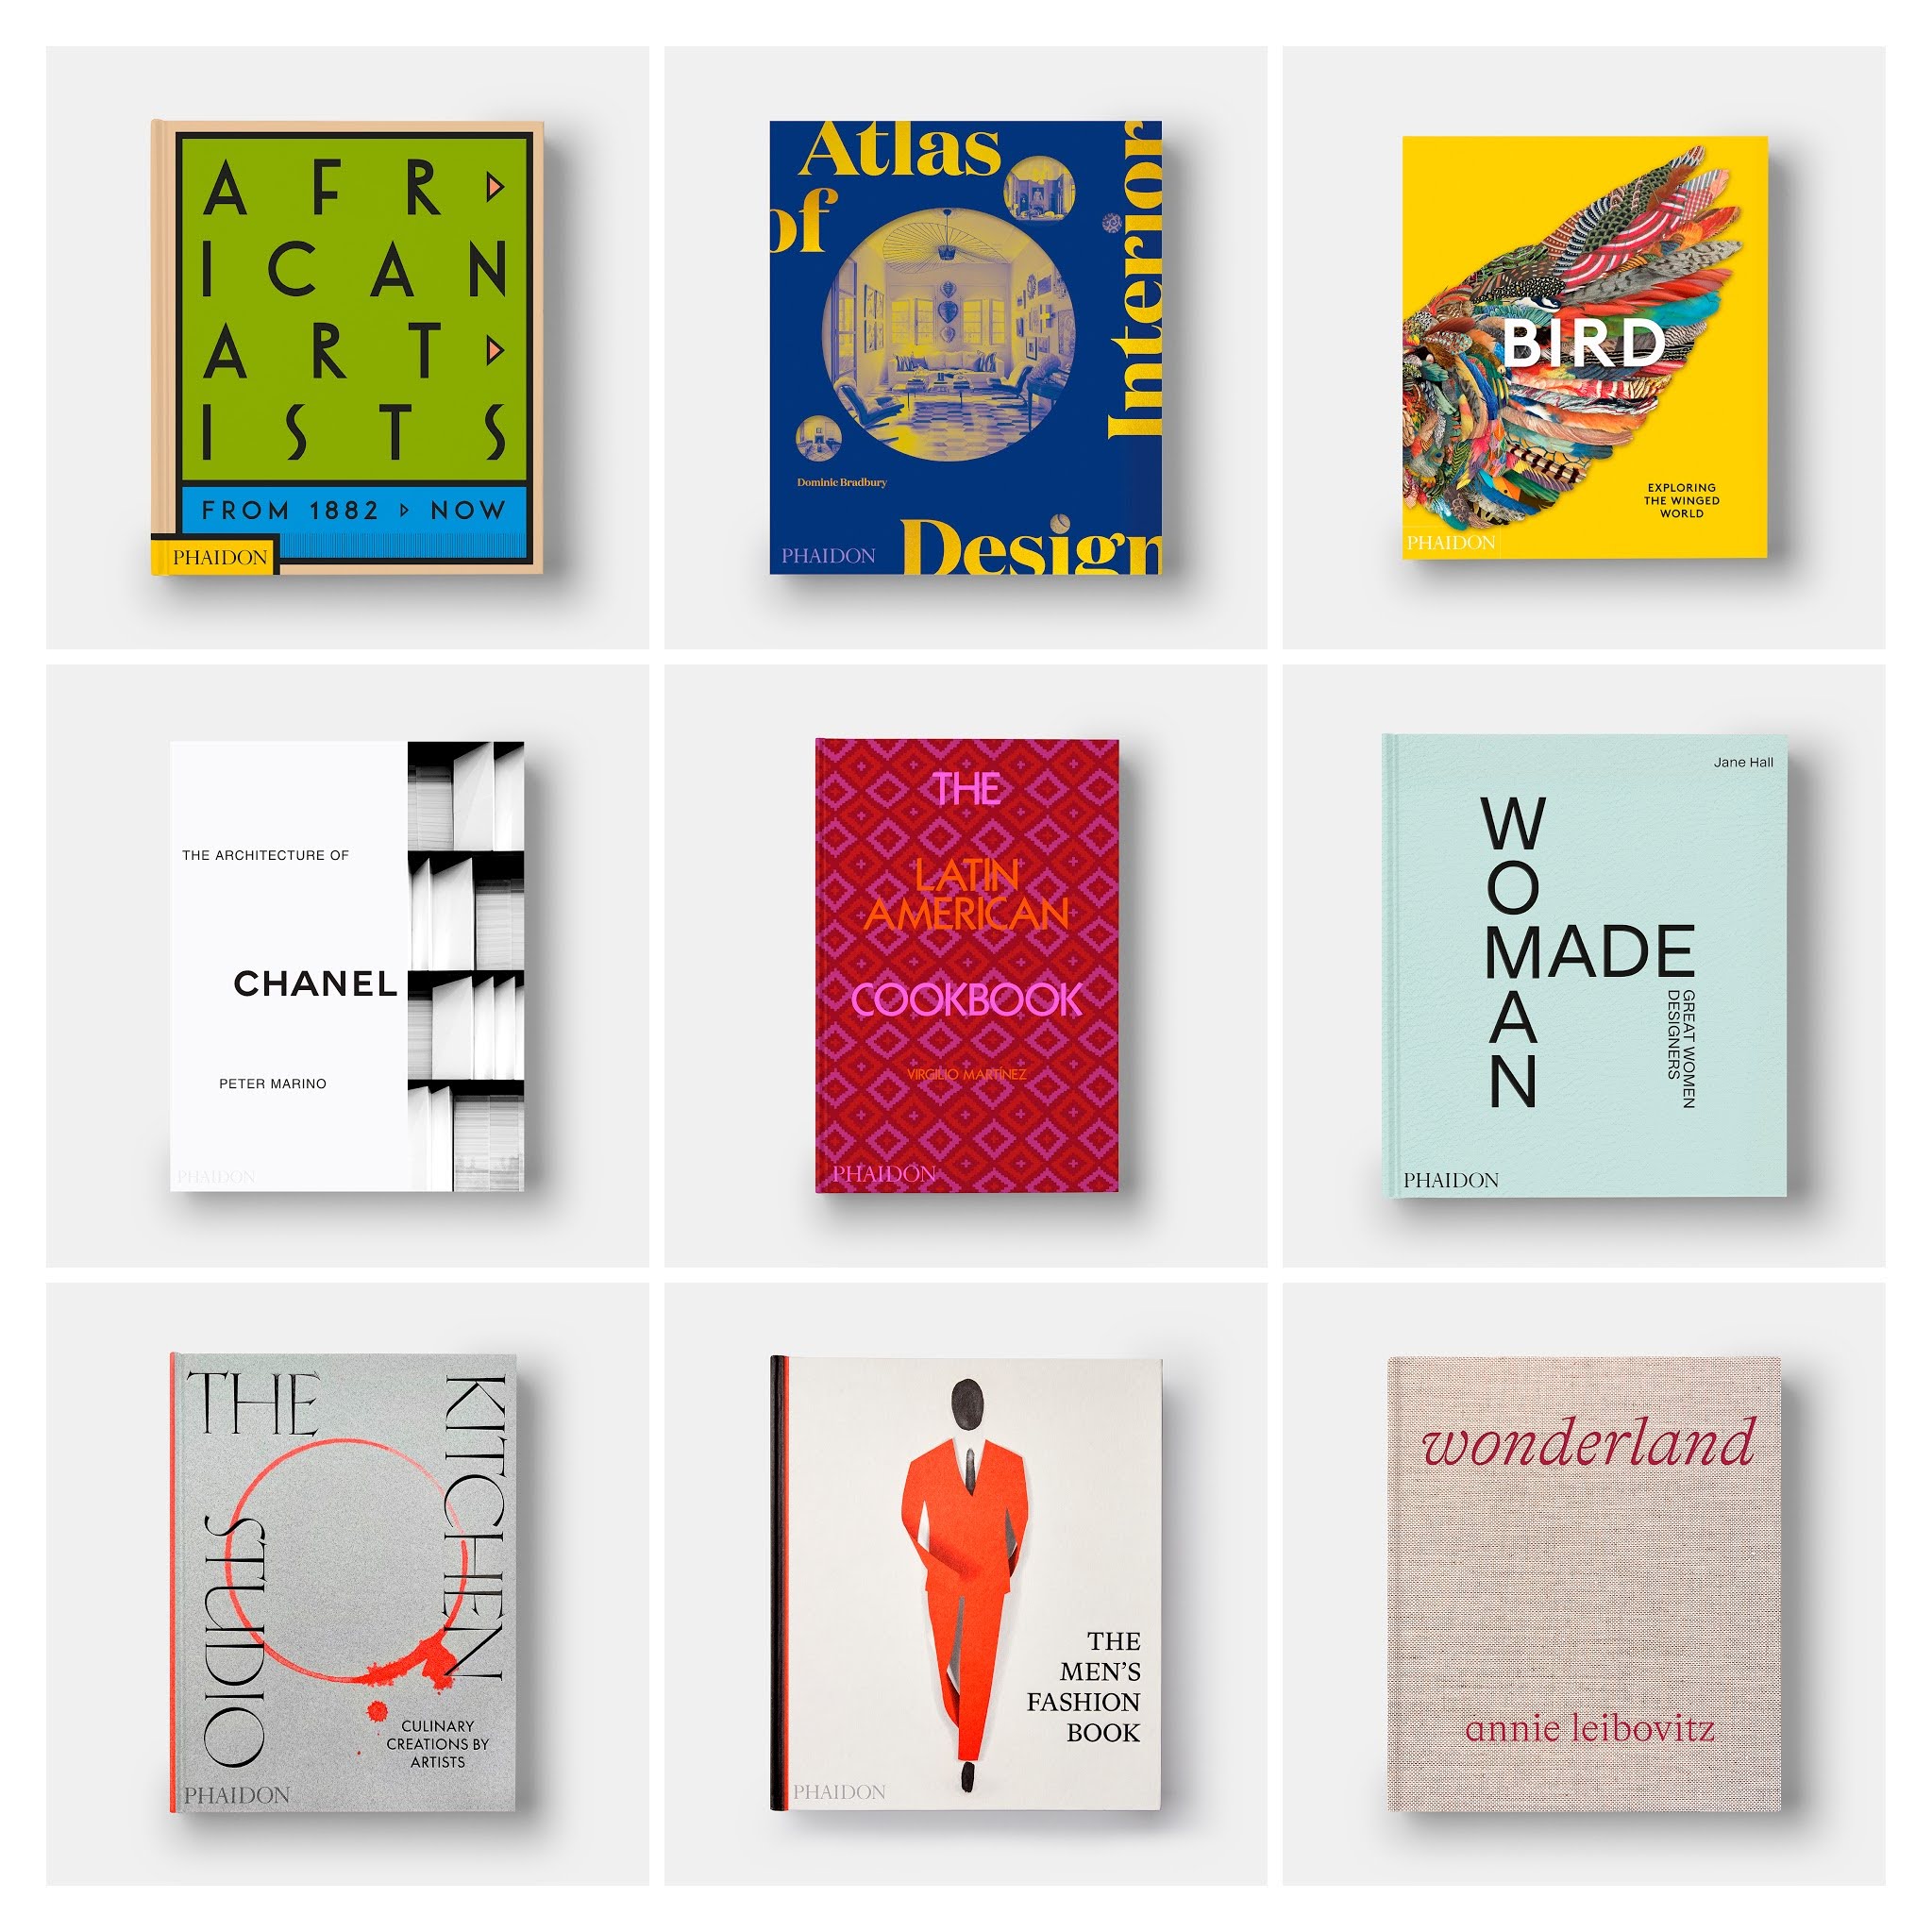 A selection of books from our Fall 2021 list. From the top left, reading across: African Artists, Atlas of Interior Design; Bird; Peter Marino: The Architecture of Chanel; The Latin American Cookbook; Woman Made; The Kitchen Studio; The Men's Fashion Book; Annie Leibovitz: Wonderland